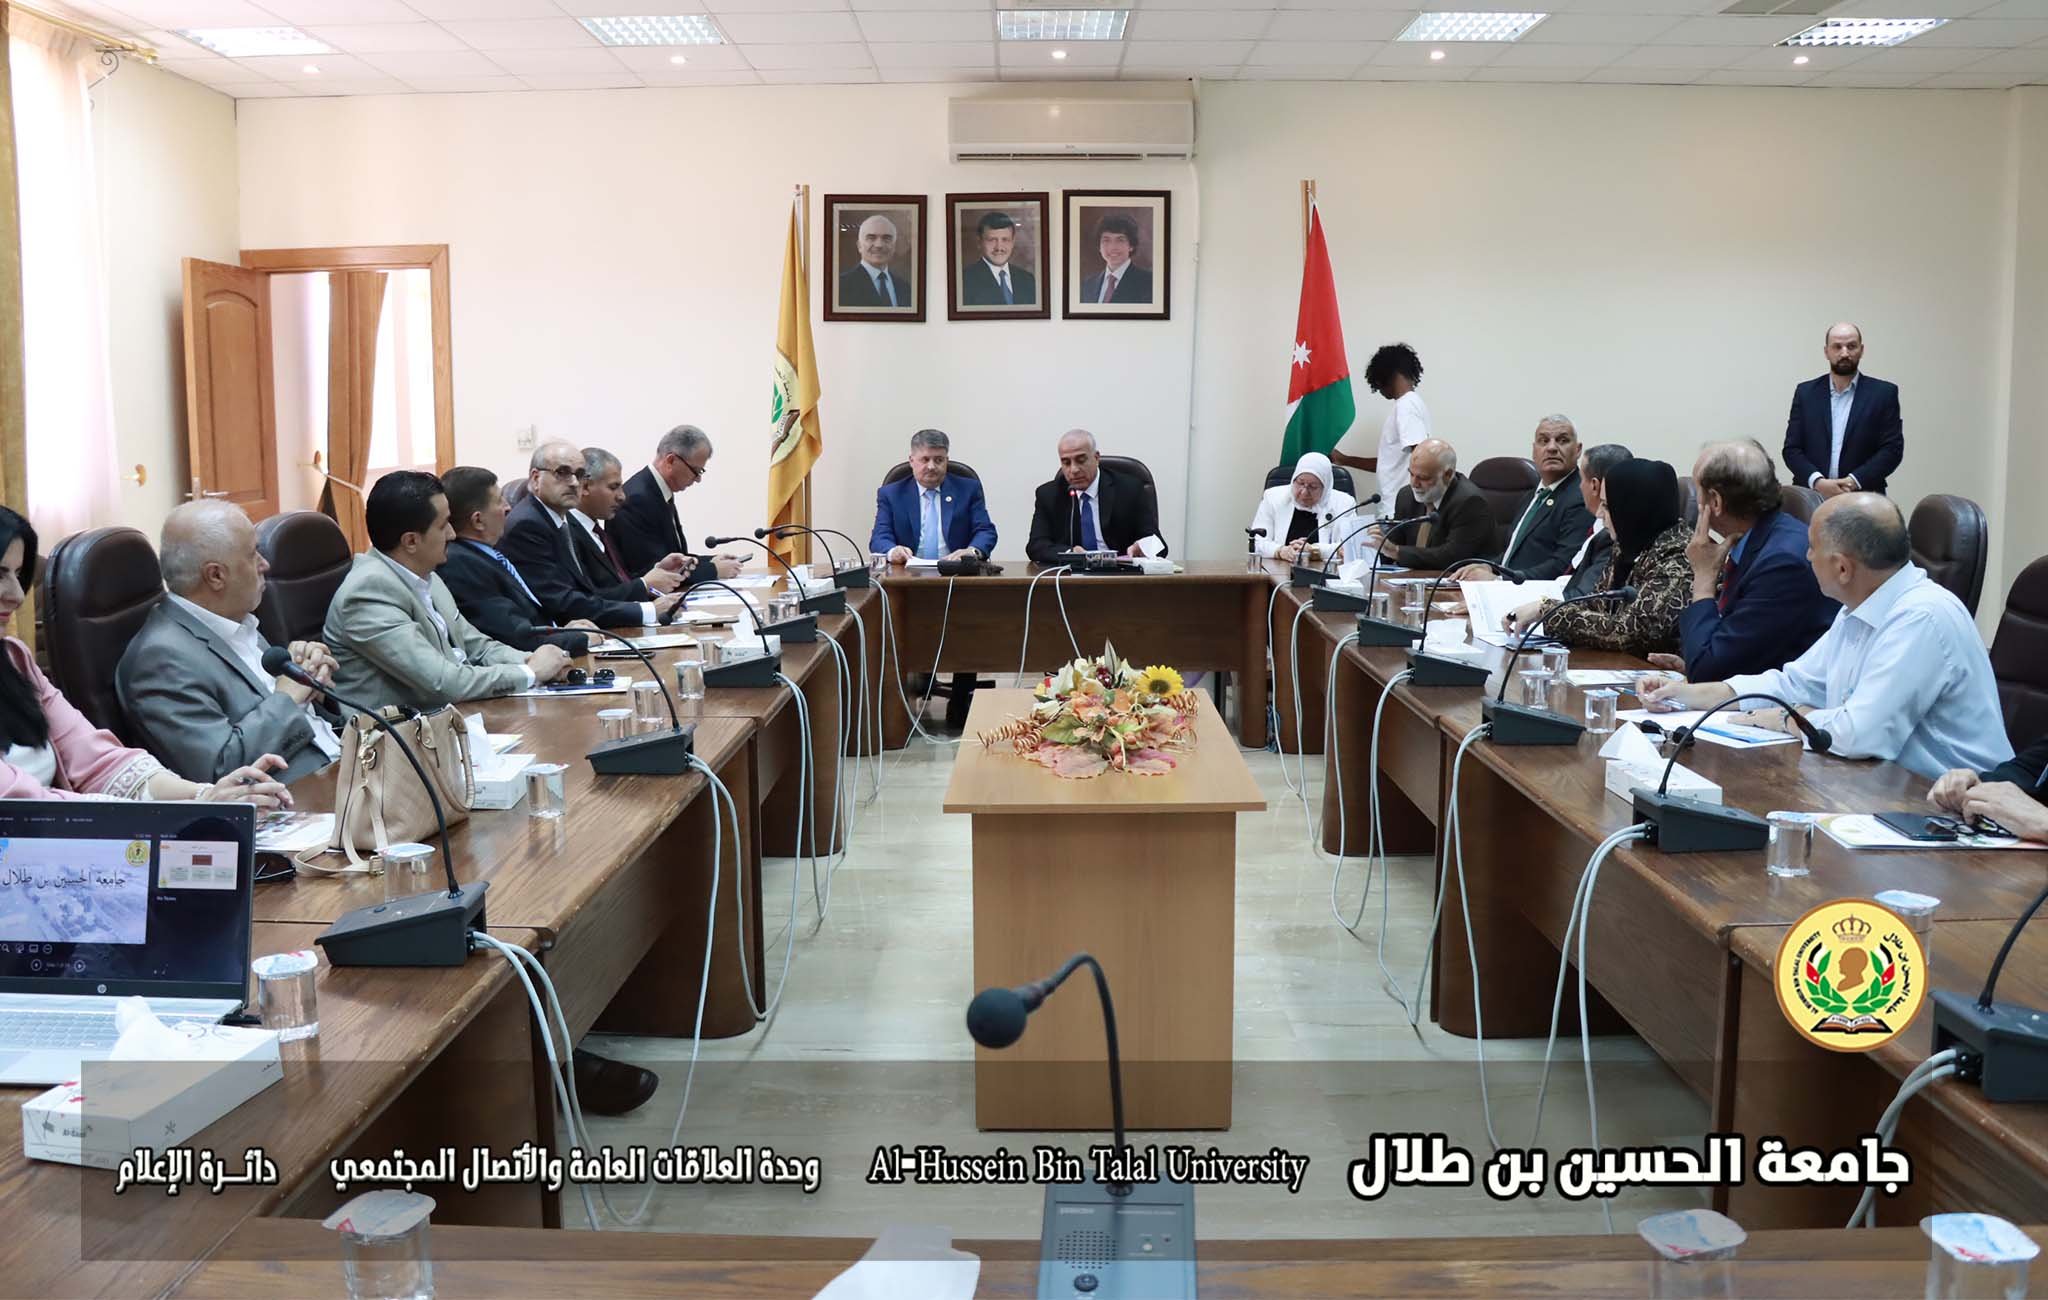 A delegation from the Aoun National Cultural Association visits Al-Hussein Bin Talal University.